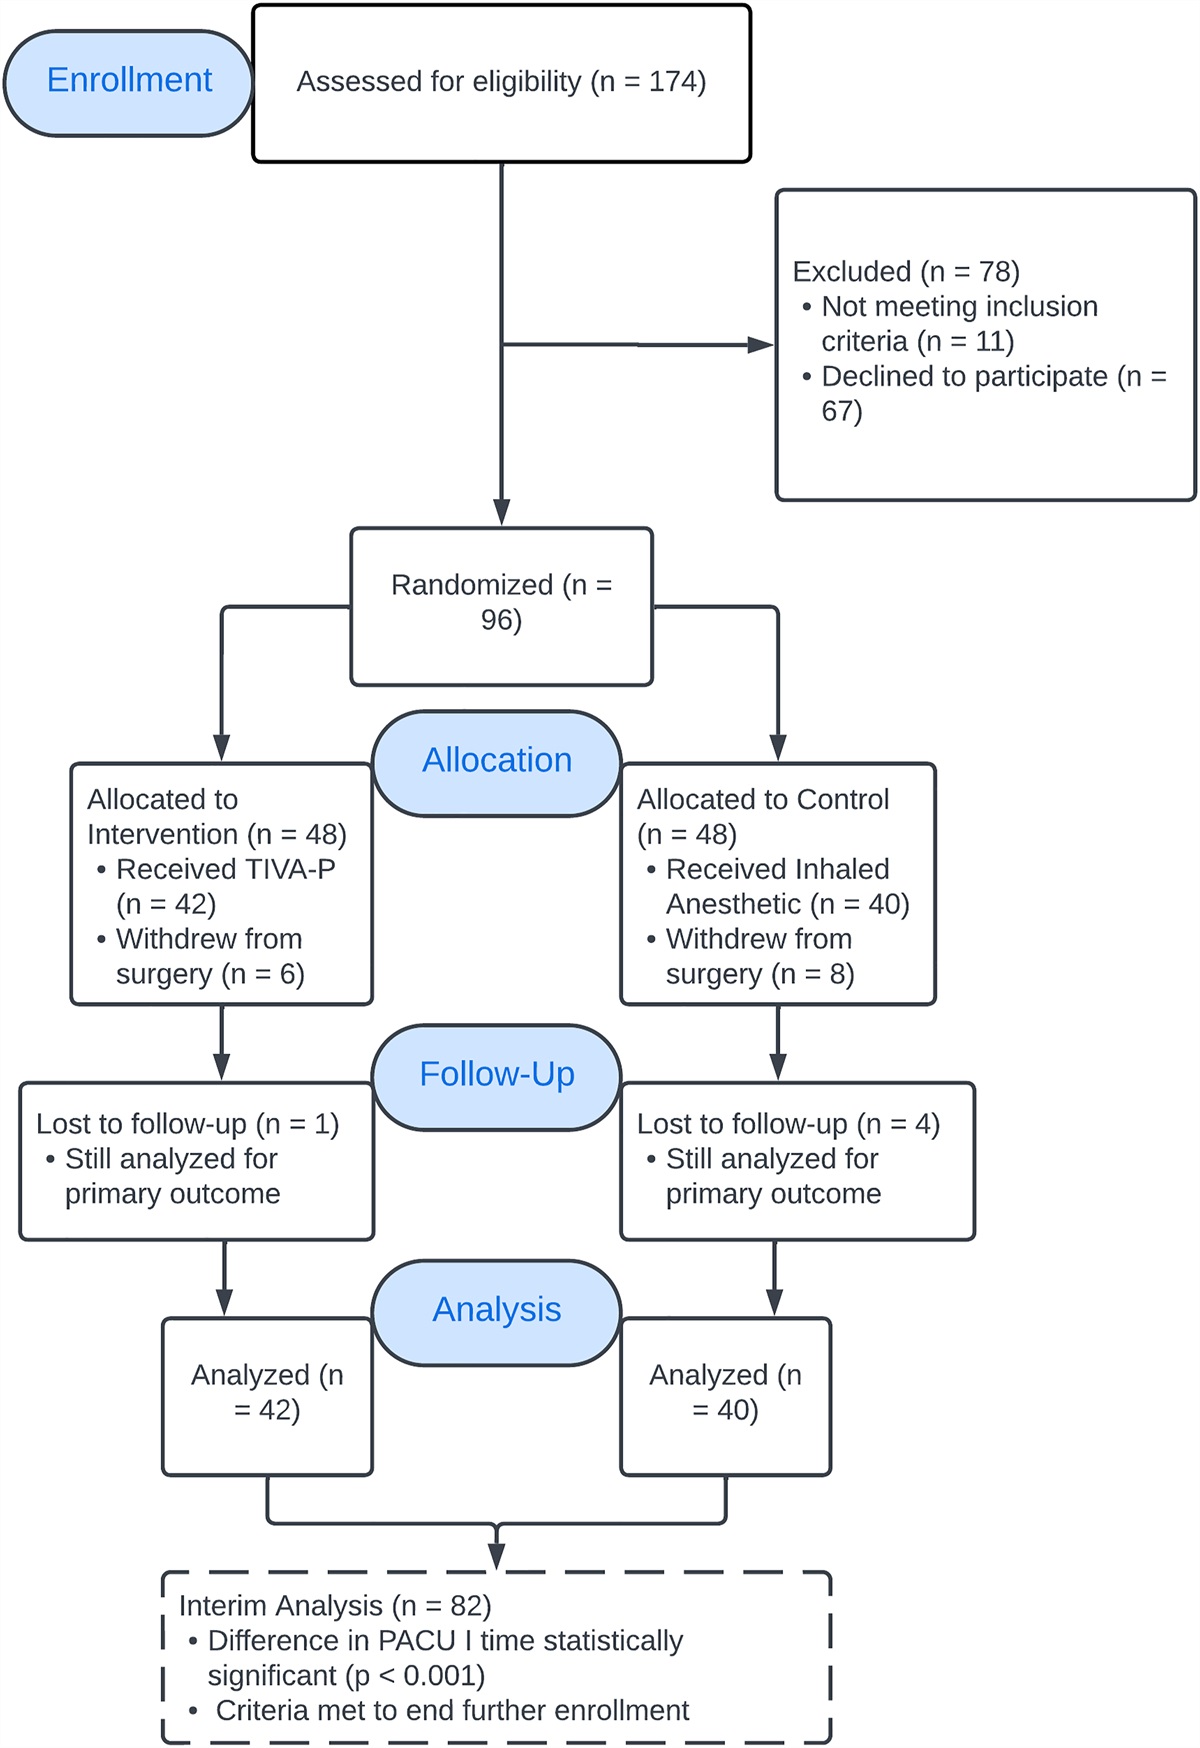 Total Intravenous Anesthesia with Propofol Reduces Discharge Times Compared with Inhaled General Anesthesia in Shoulder Arthroscopy: A Randomized Controlled Trial